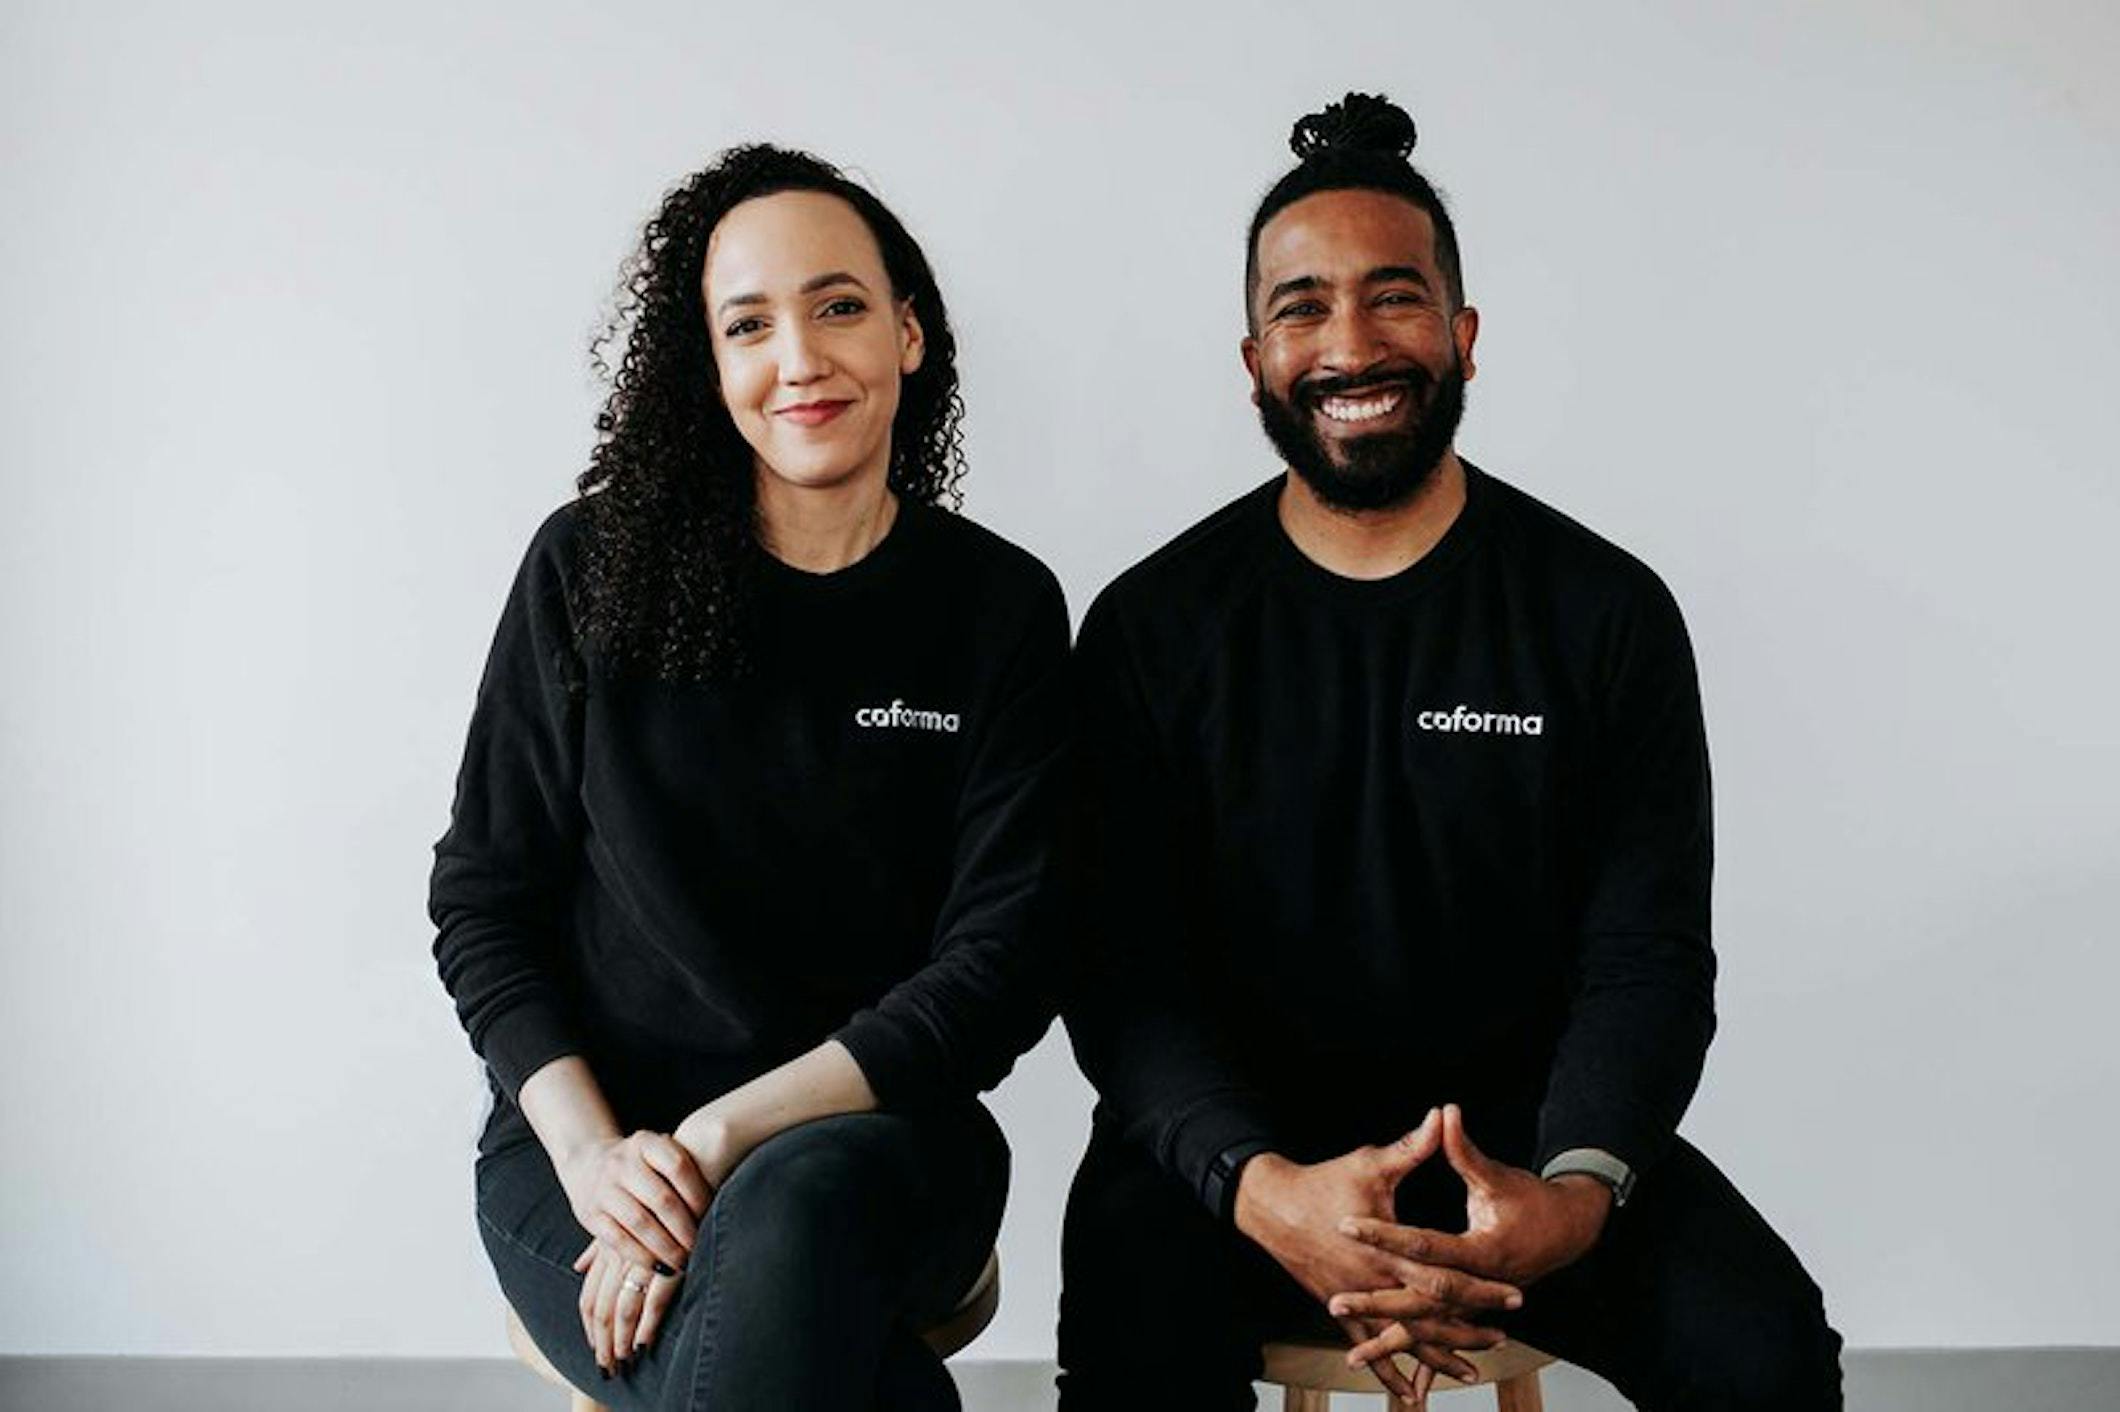 Ashleigh Axios and Eduardo Ortiz sit warmly smiling at the viewer in matching sweaters with the Coforma logo on the chest